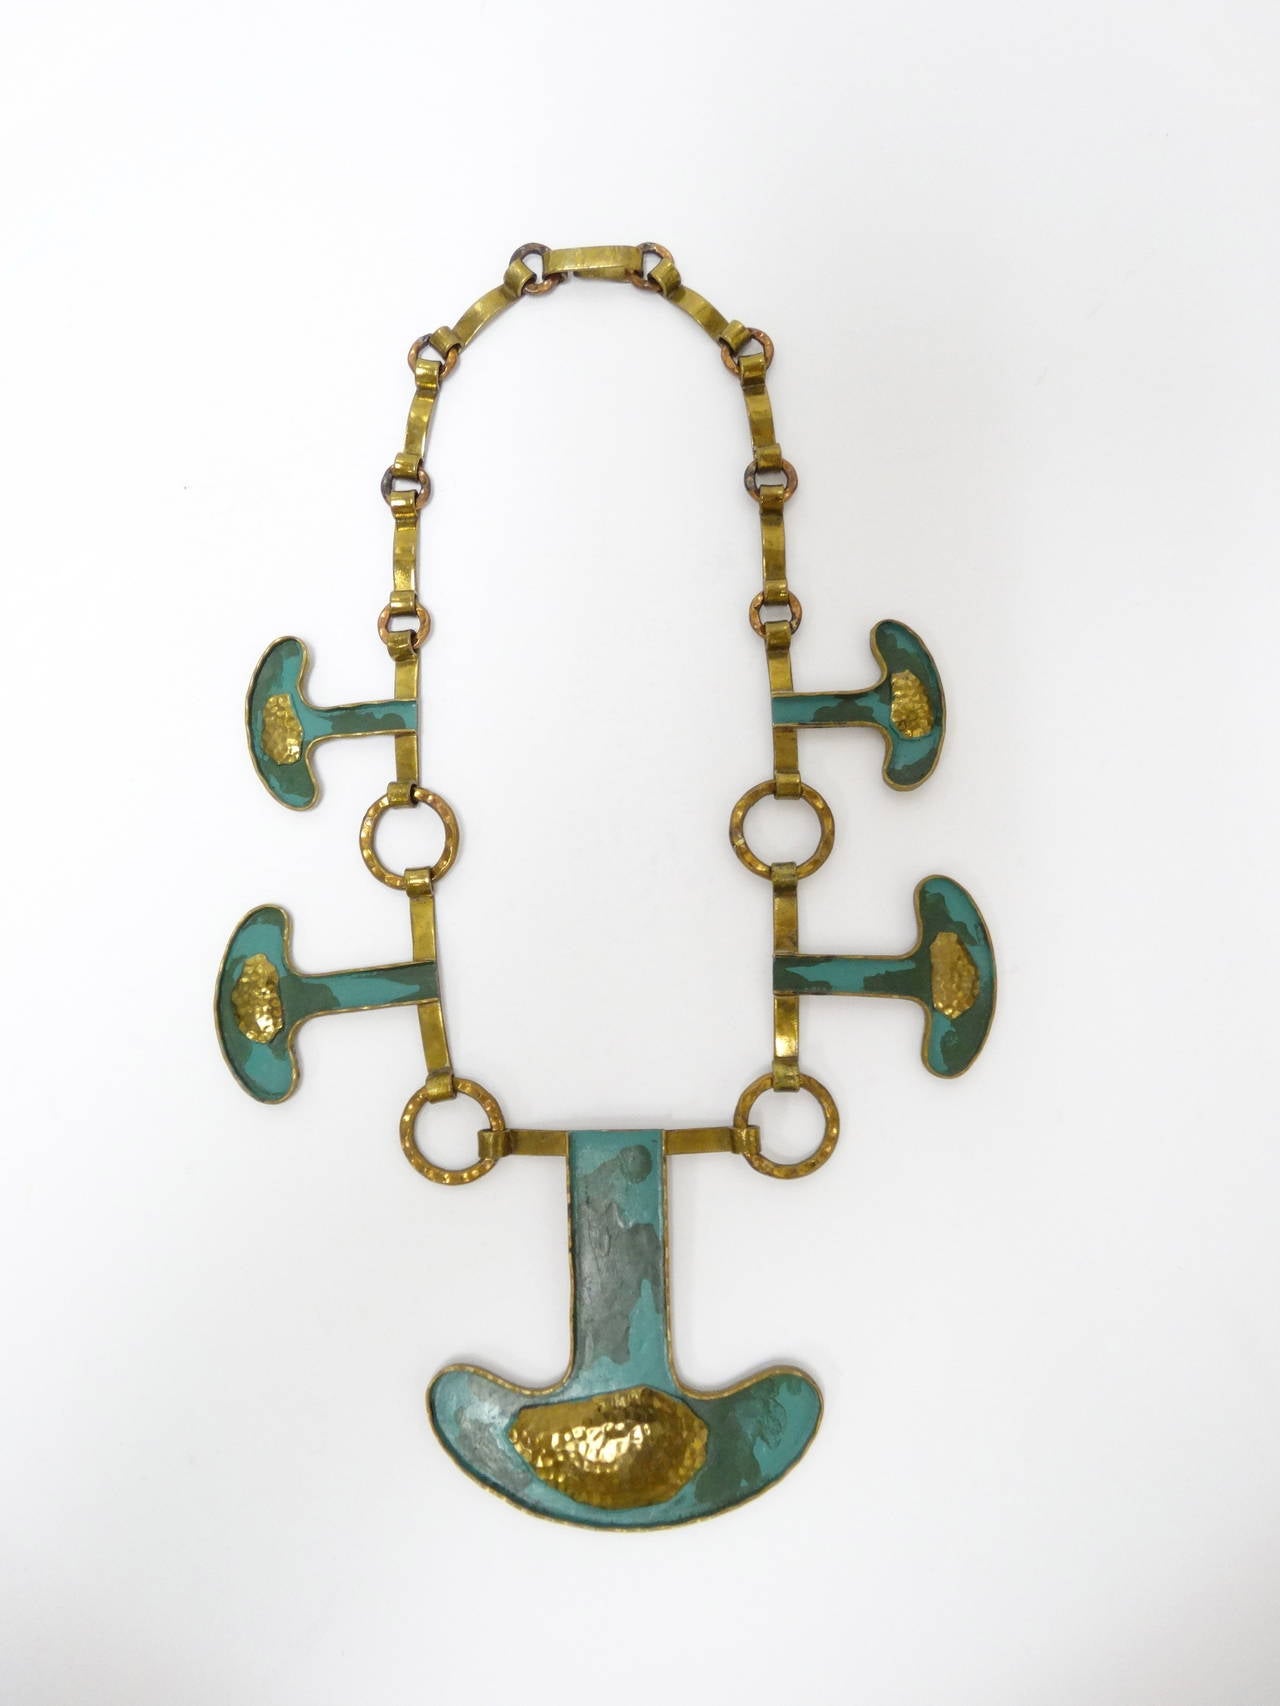 Casa Maya Mexican Hammered Brass Modernist Necklace circa 1960's. This is a beautiful necklace created by Casa Maya made of copper and brass polychrome in greens with large hammered brass in the center of pendent signed 